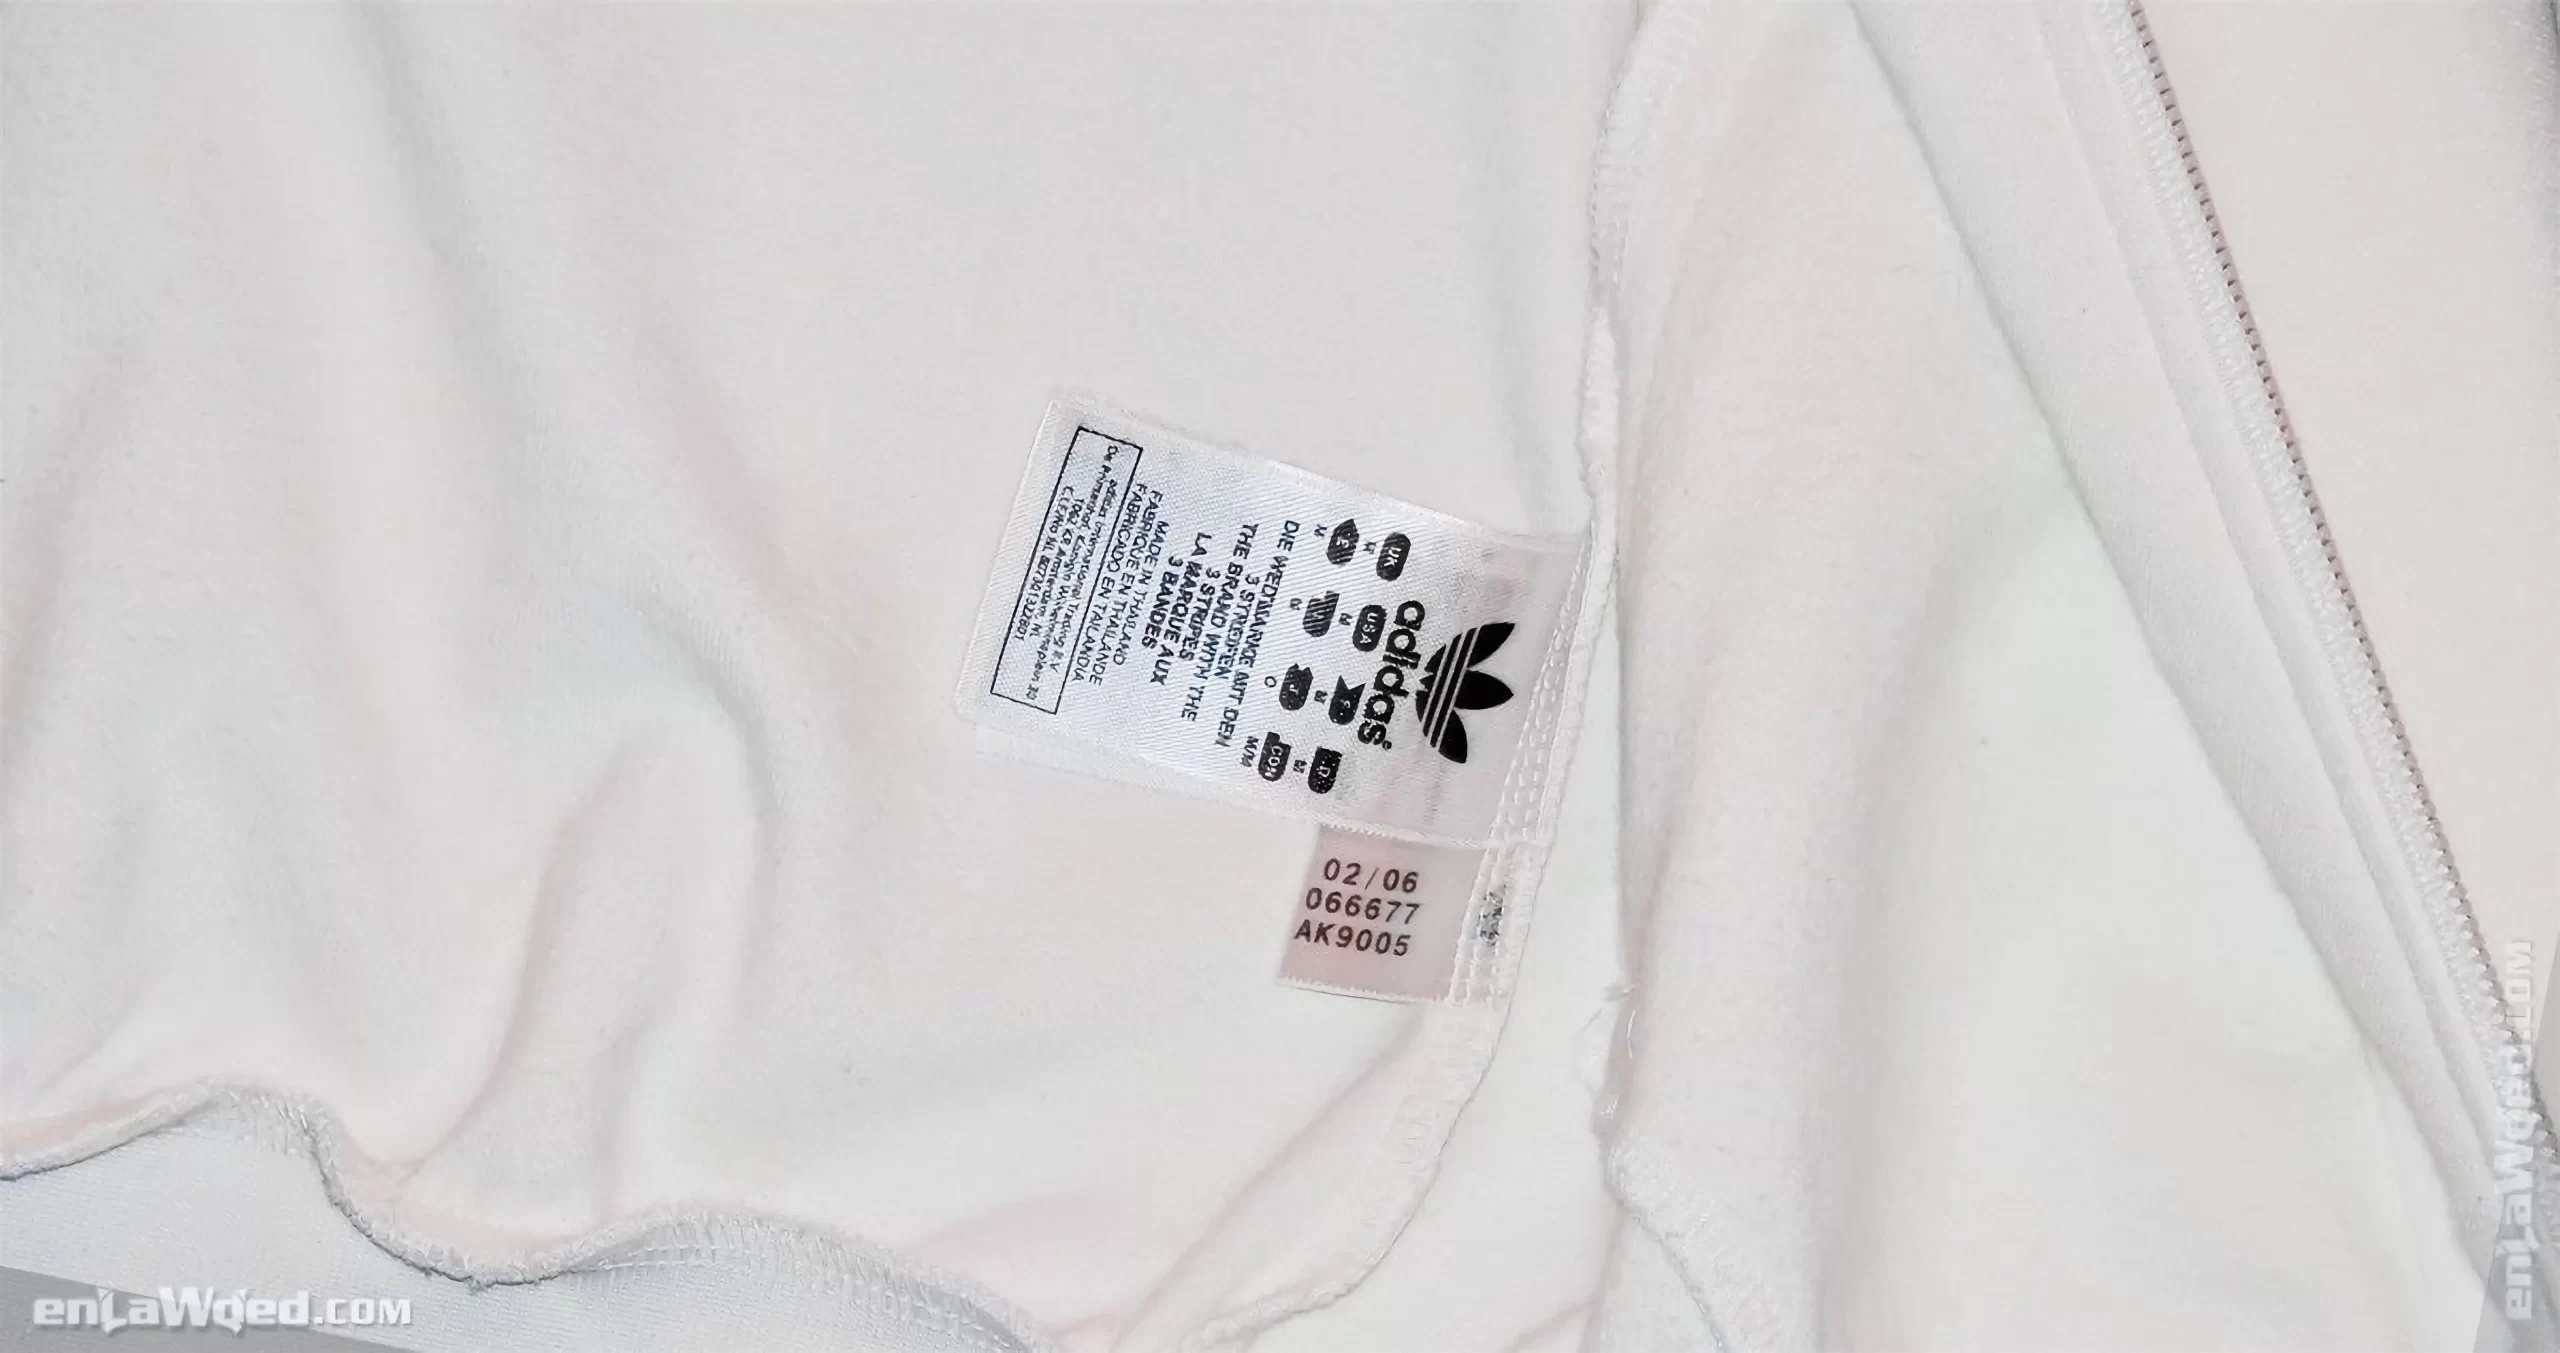 Adidas tag of the Italia 82 jacket, with the month and year of fabrication: 02/2006